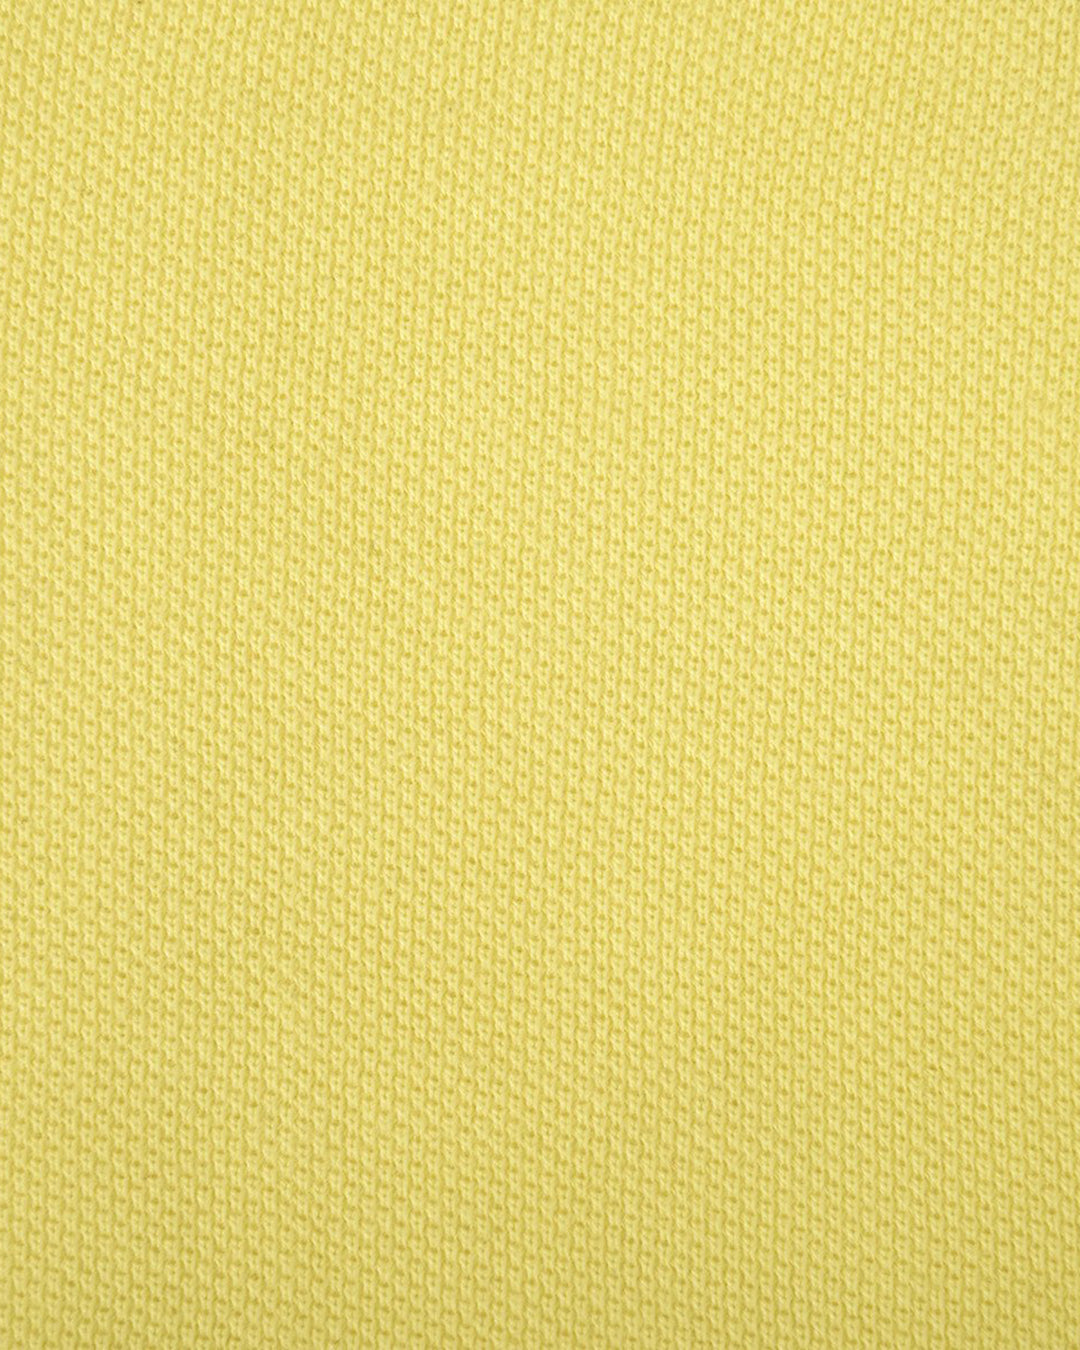 Close up of the custom oxford polo shirt for men by Luxire in mid yellow